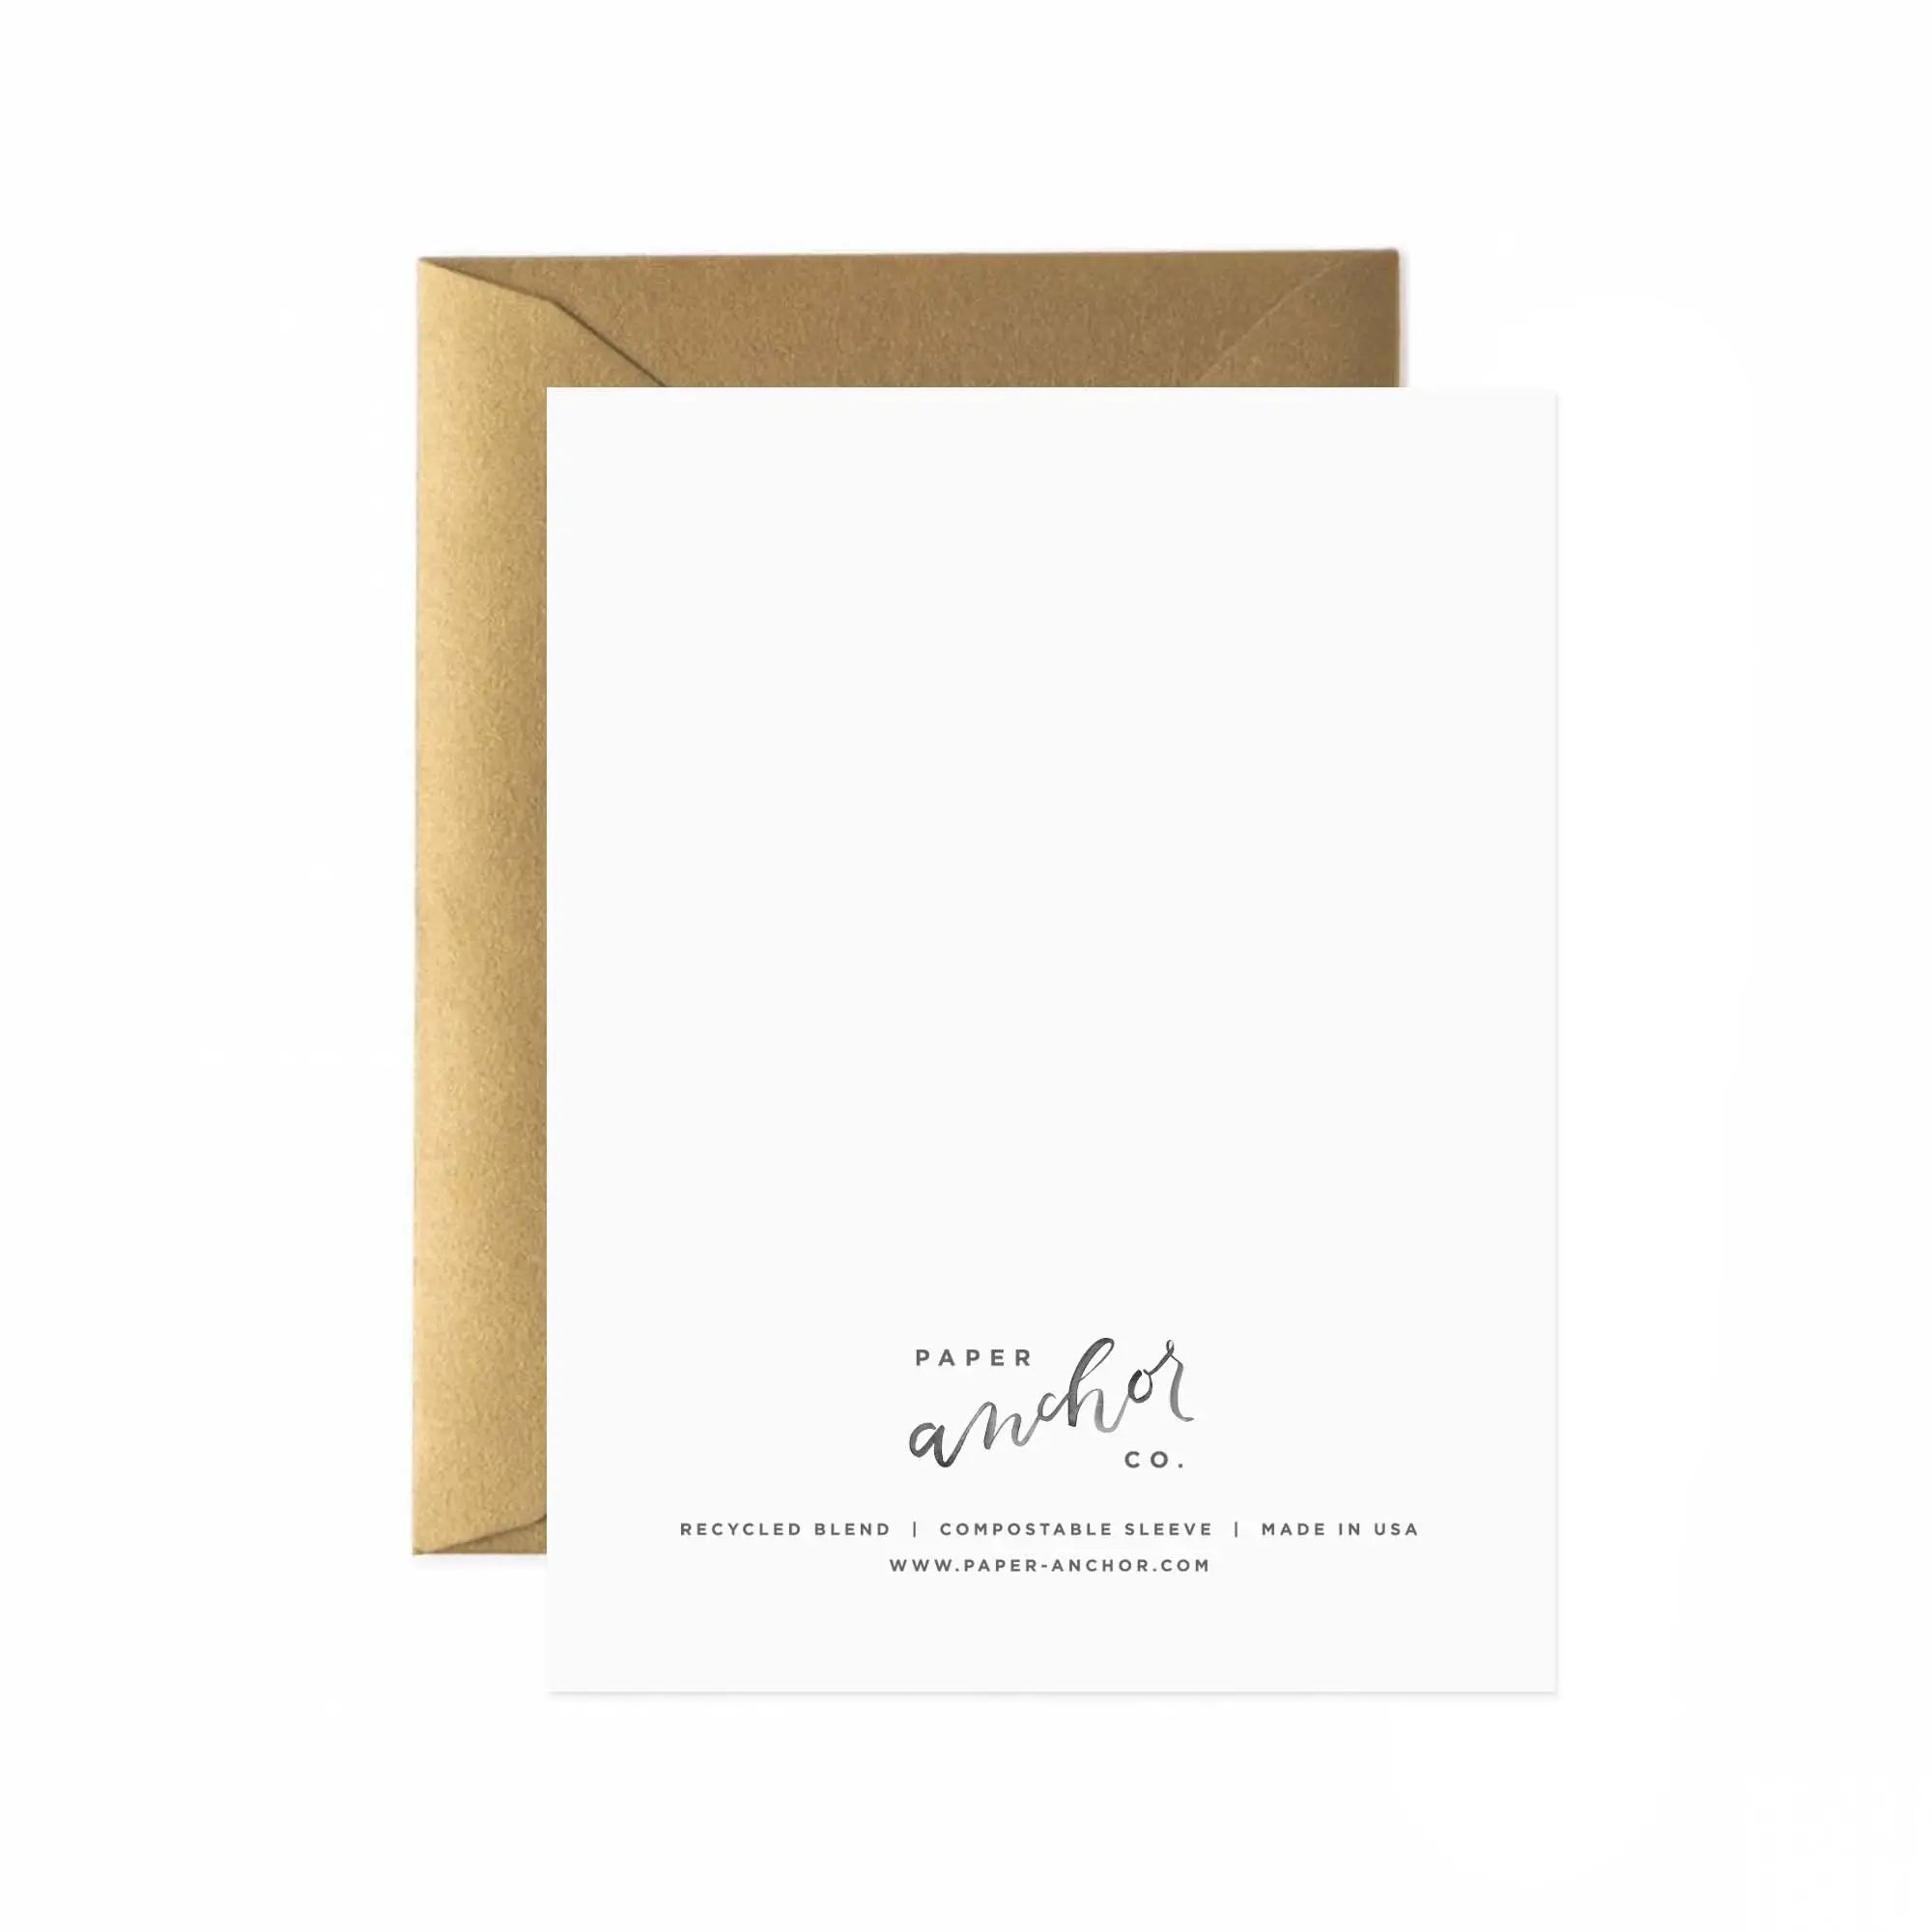 The Full of Growth Birthday Card by Paper Anchor Co